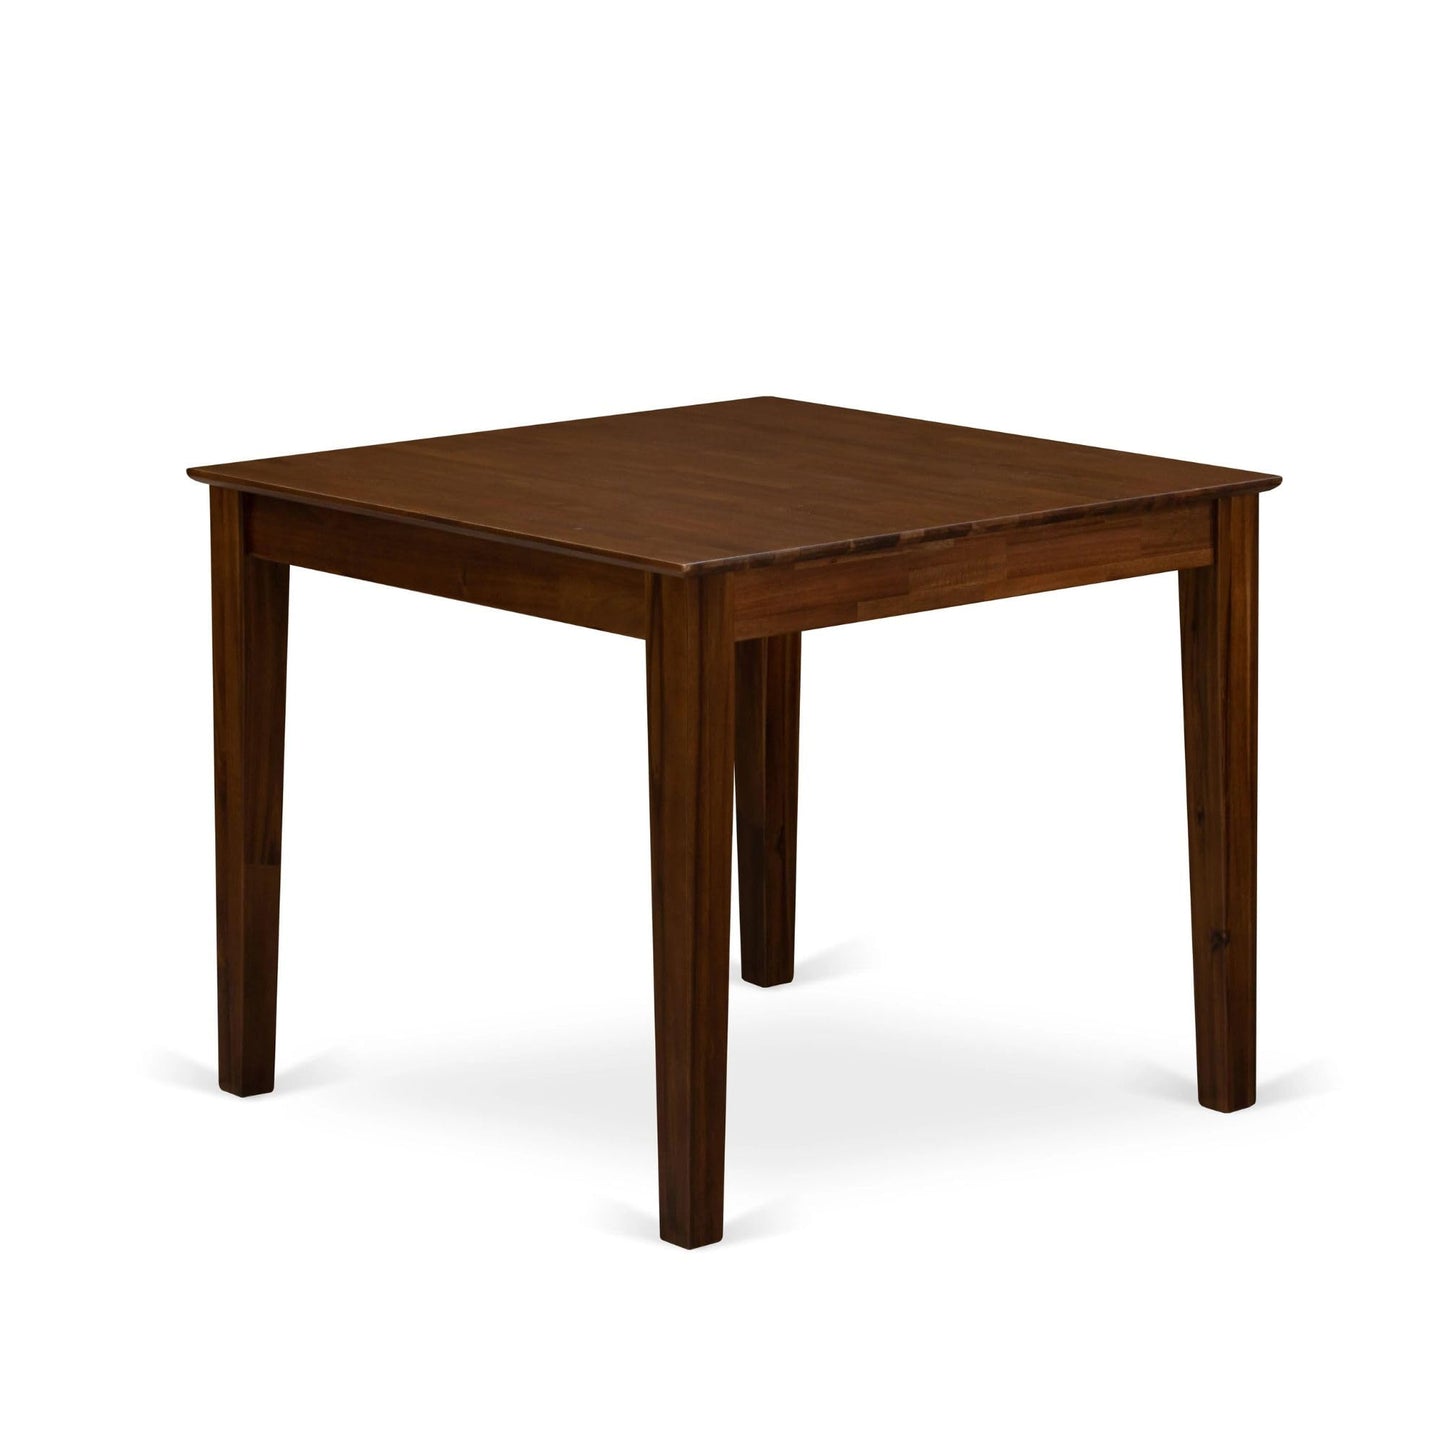 East West Furniture Oxford Square Kitchen Dining Table for Small Spaces, 36x36 Inch, Antique Walnut